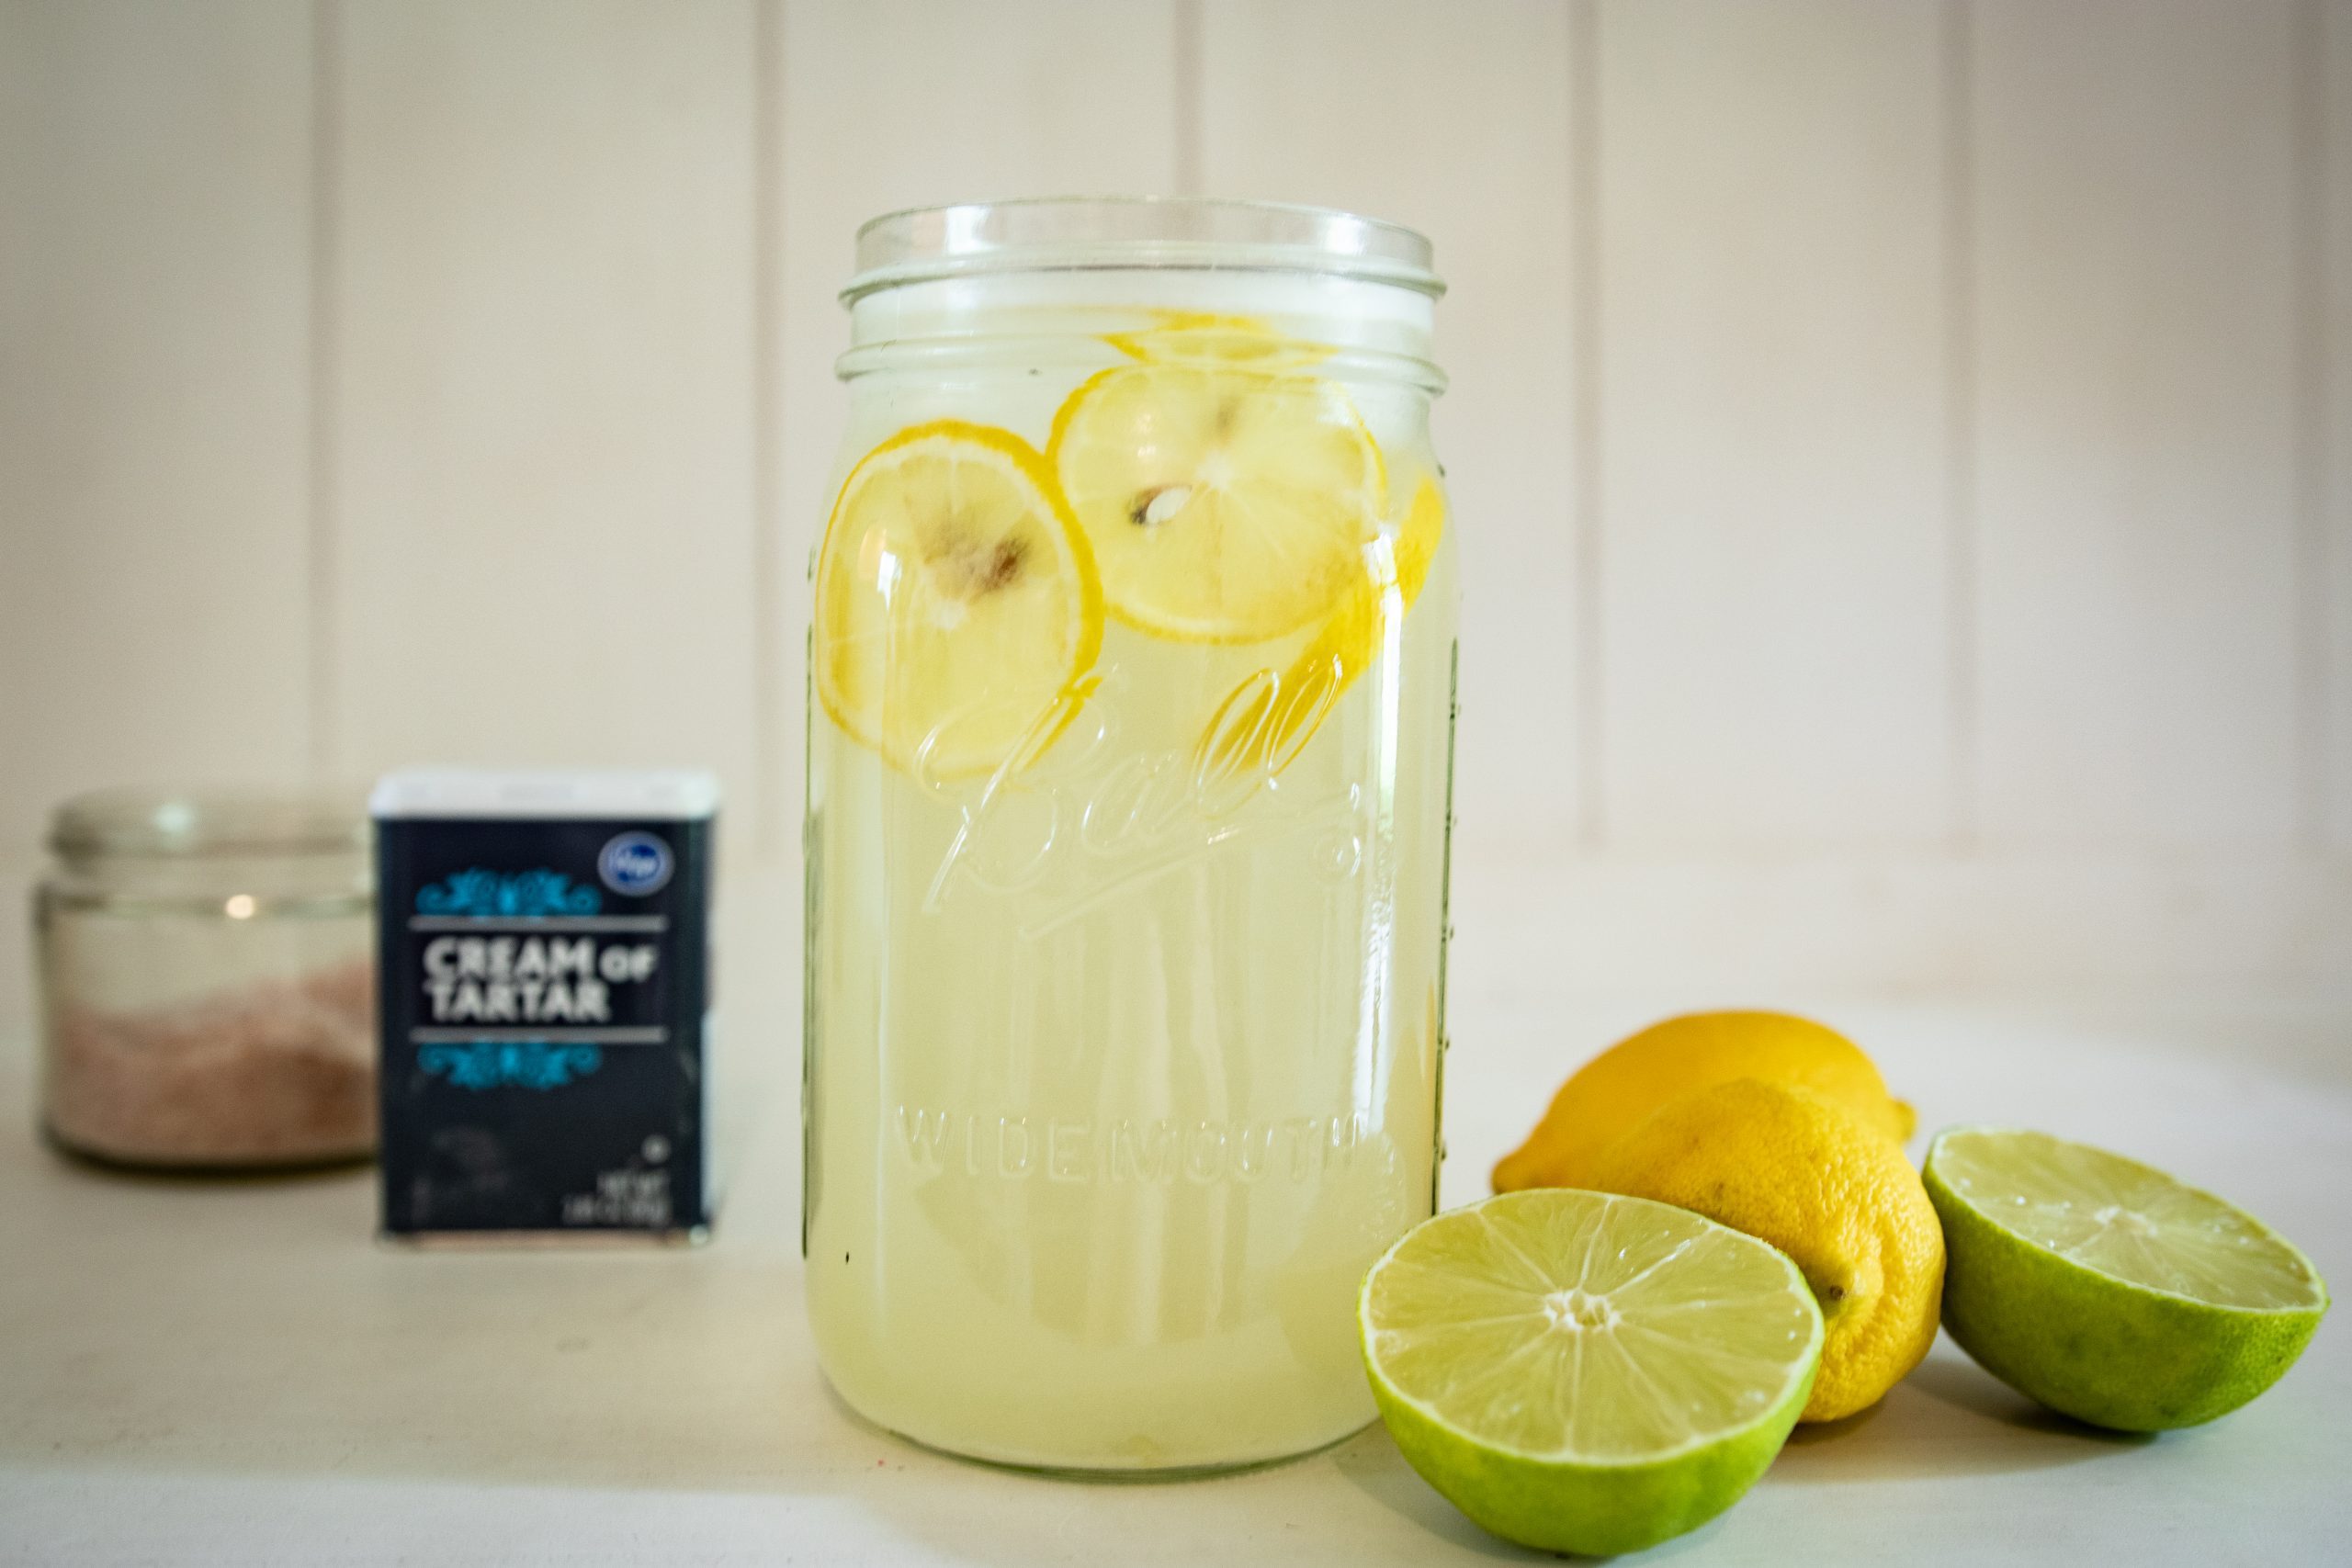 lemon lime electrolyte drink with lemons and limes next to it